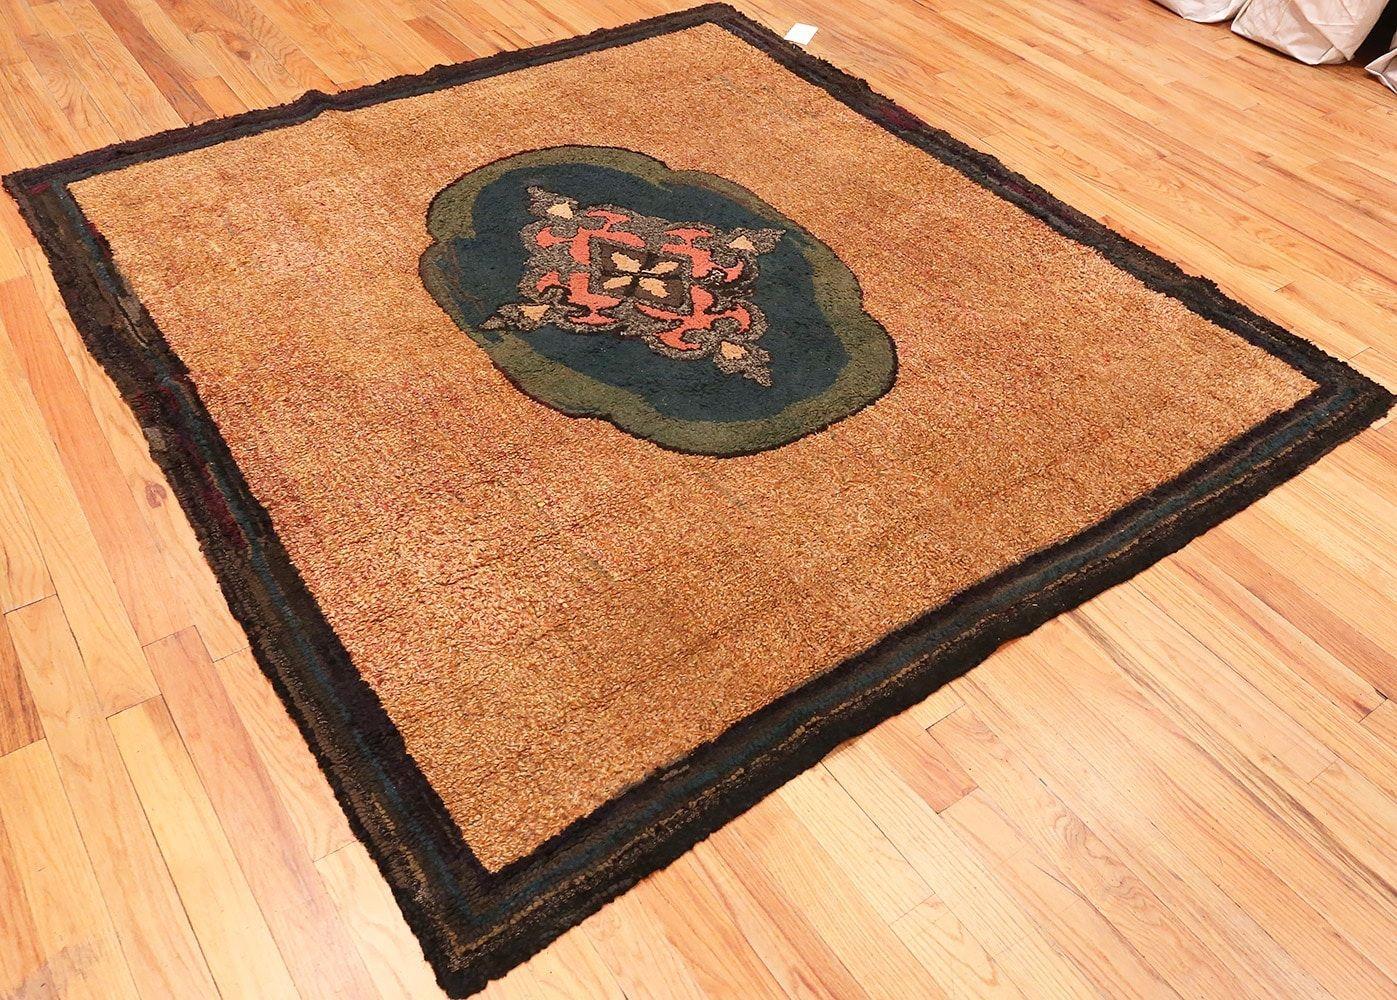 American Colonial Square Antique American Hooked Rug. Size: 7 ft x 7 ft 2 in (2.13 m x 2.18 m)